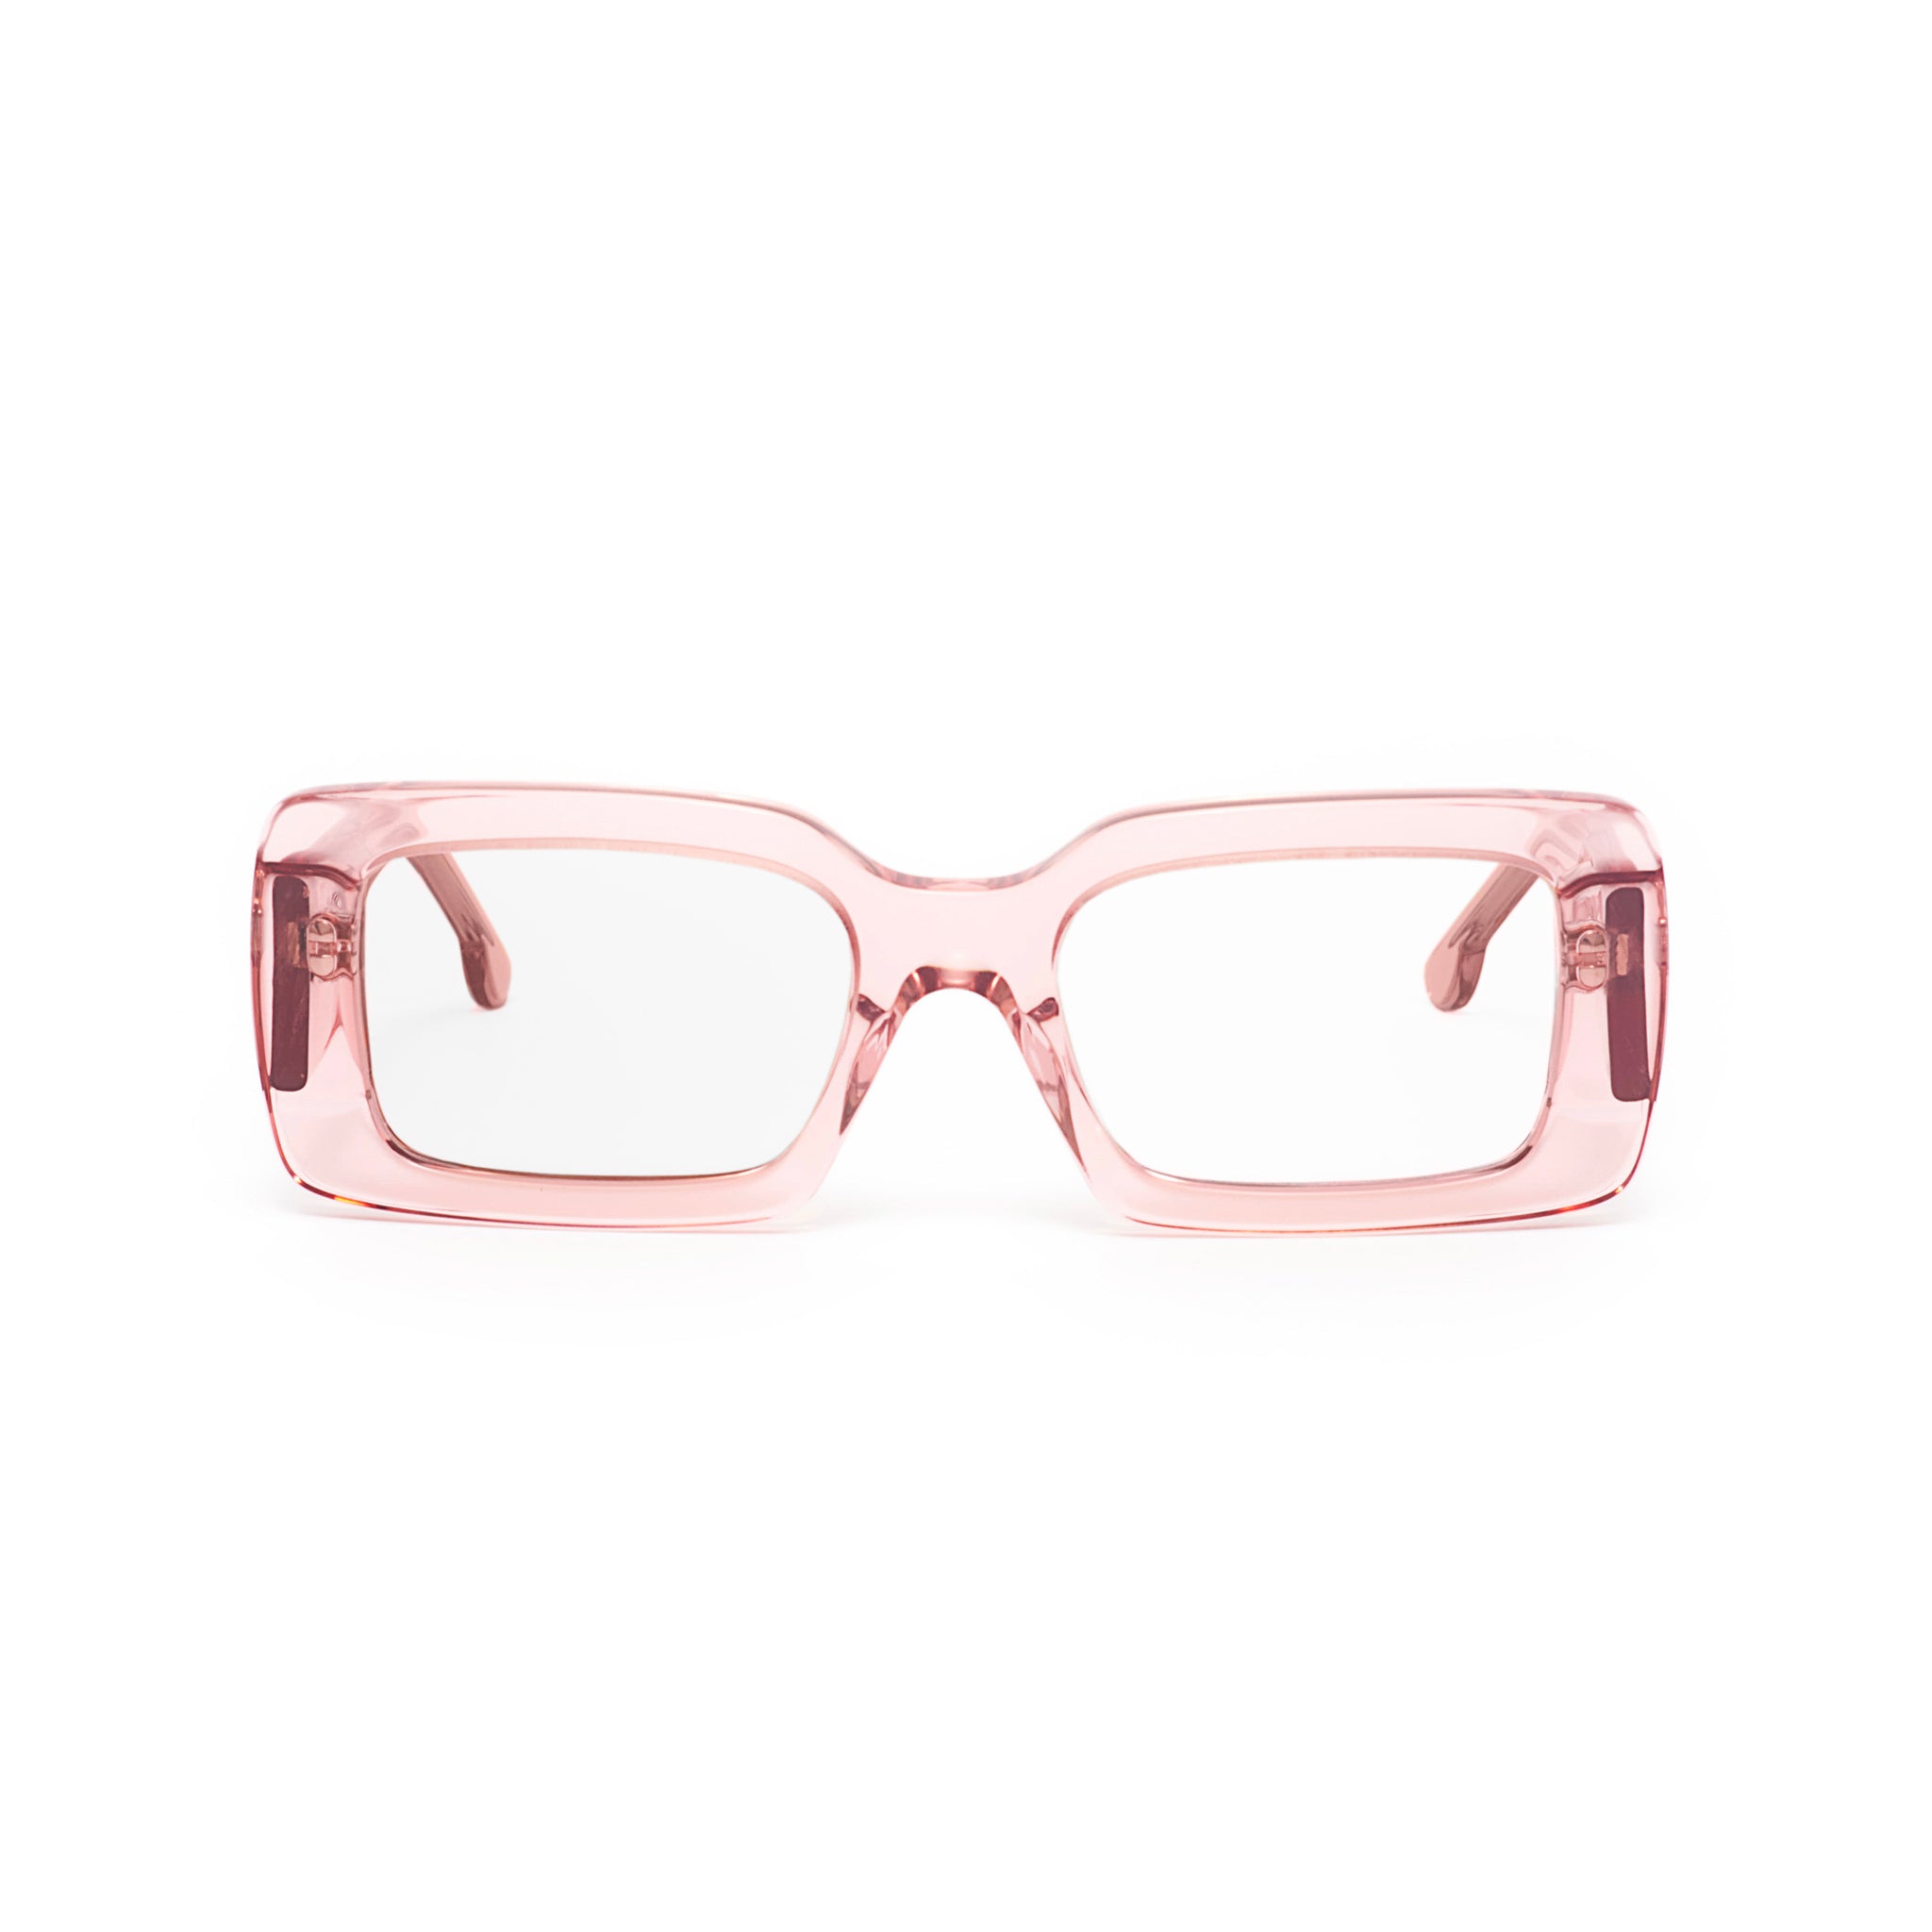 Ameos eyewear sasha optical glasses in pink transparent frames. Unisex and handmade in Italy.